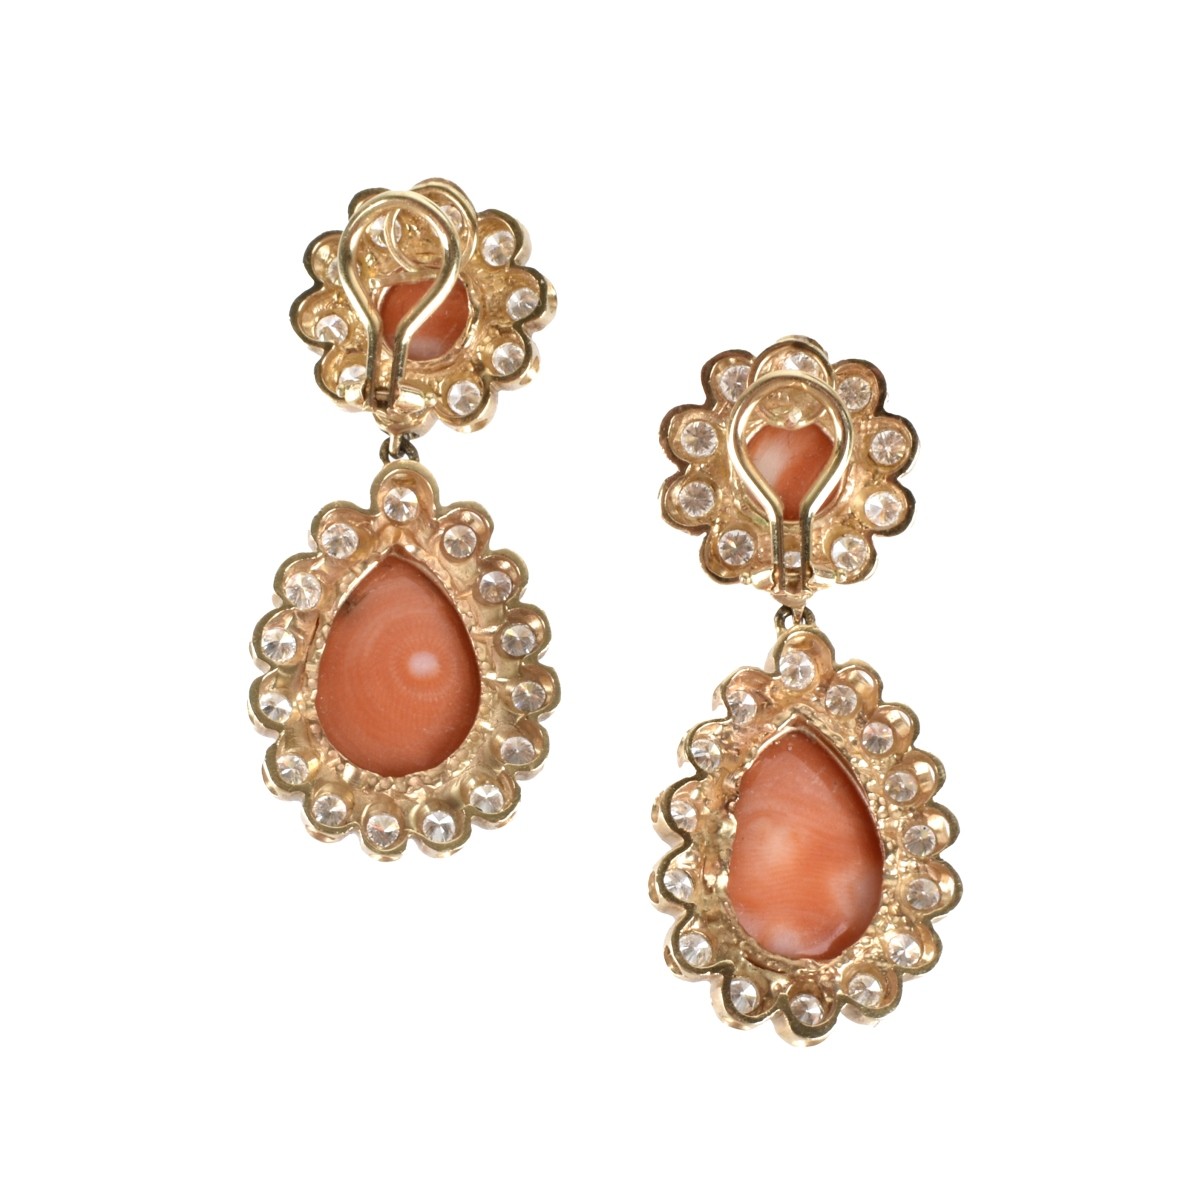 Diamond, Red Coral and 14K Earrings